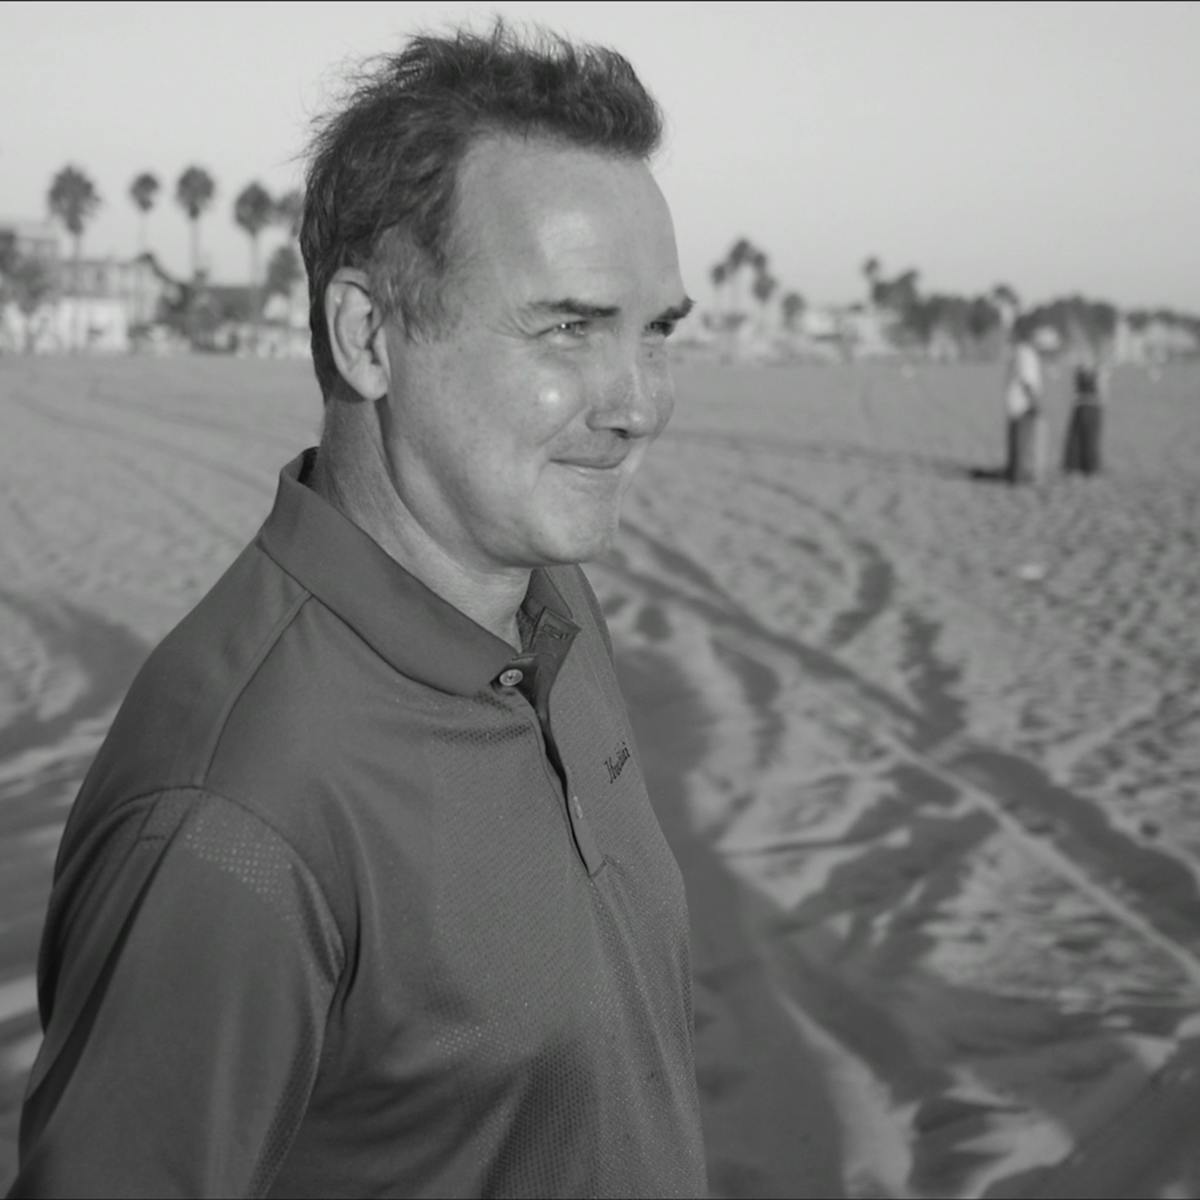 Norm Macdonald stands on a beach, his face lit by the sun.